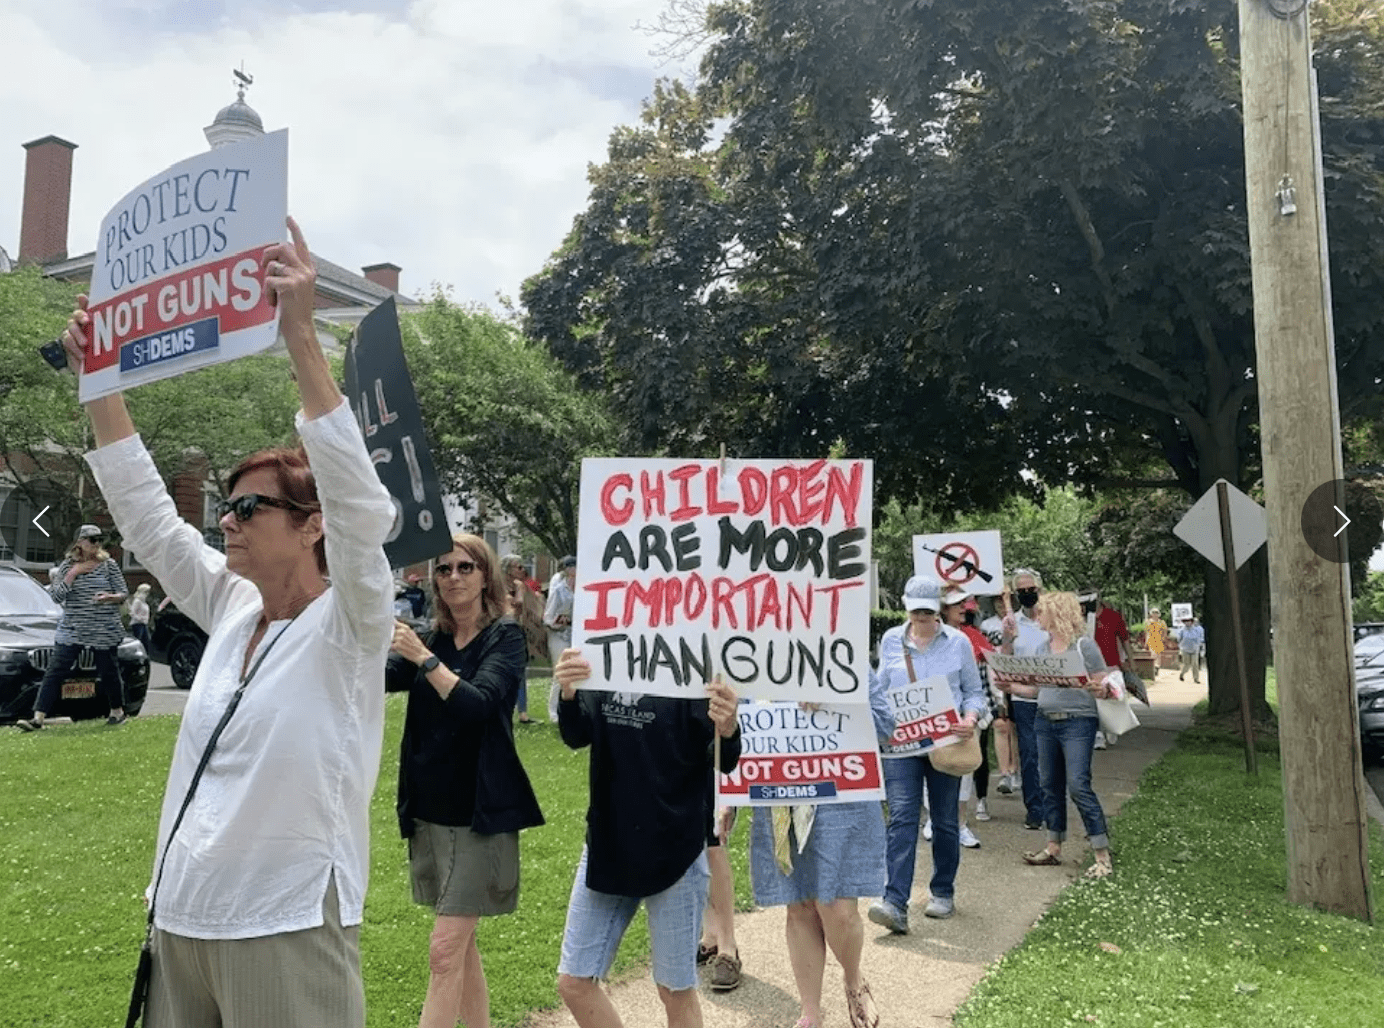 Patch.com: Students Describe Fear At Anti-Gun Rally: ‘It’s Not If, It’s When’